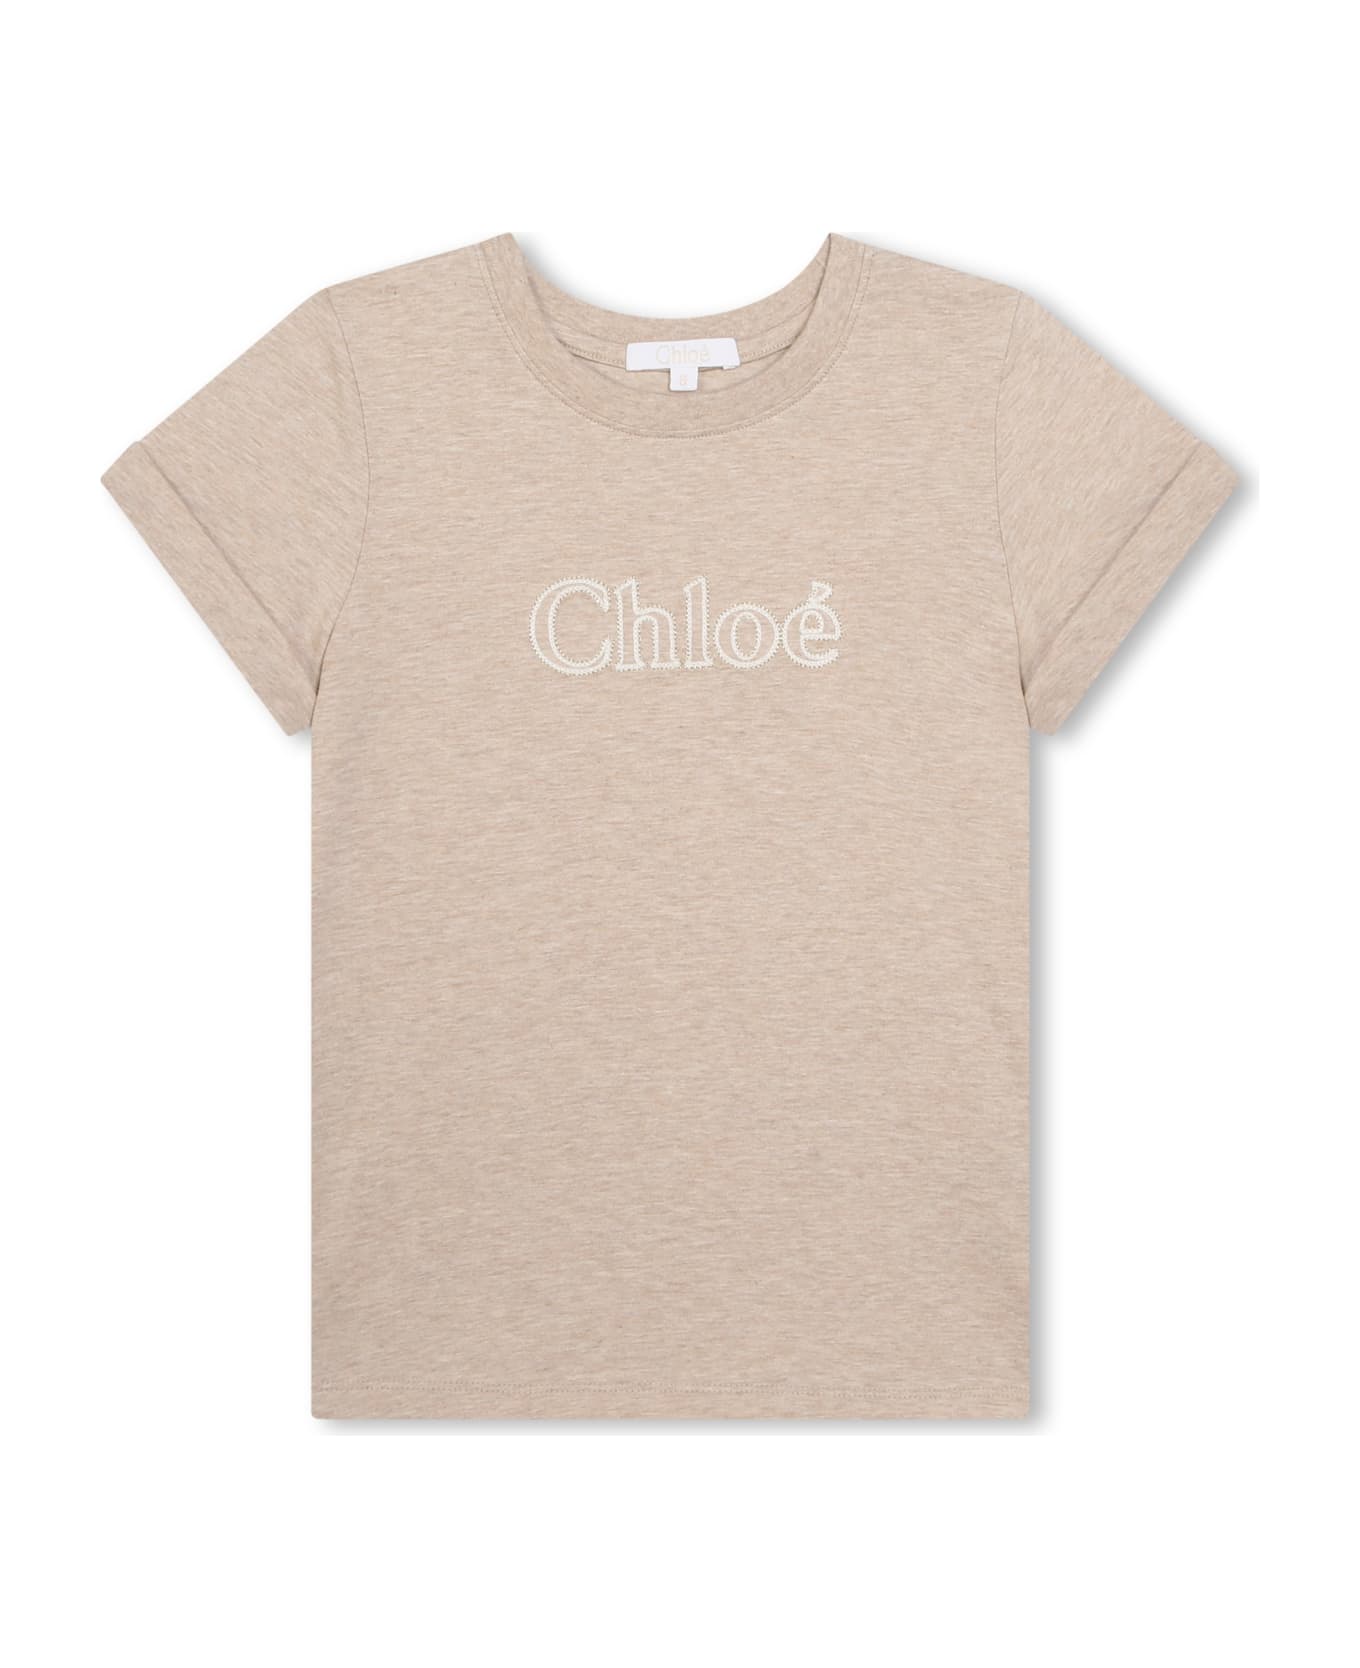 Chloé T-shirt With Print - Beige Antico Tシャツ＆ポロシャツ